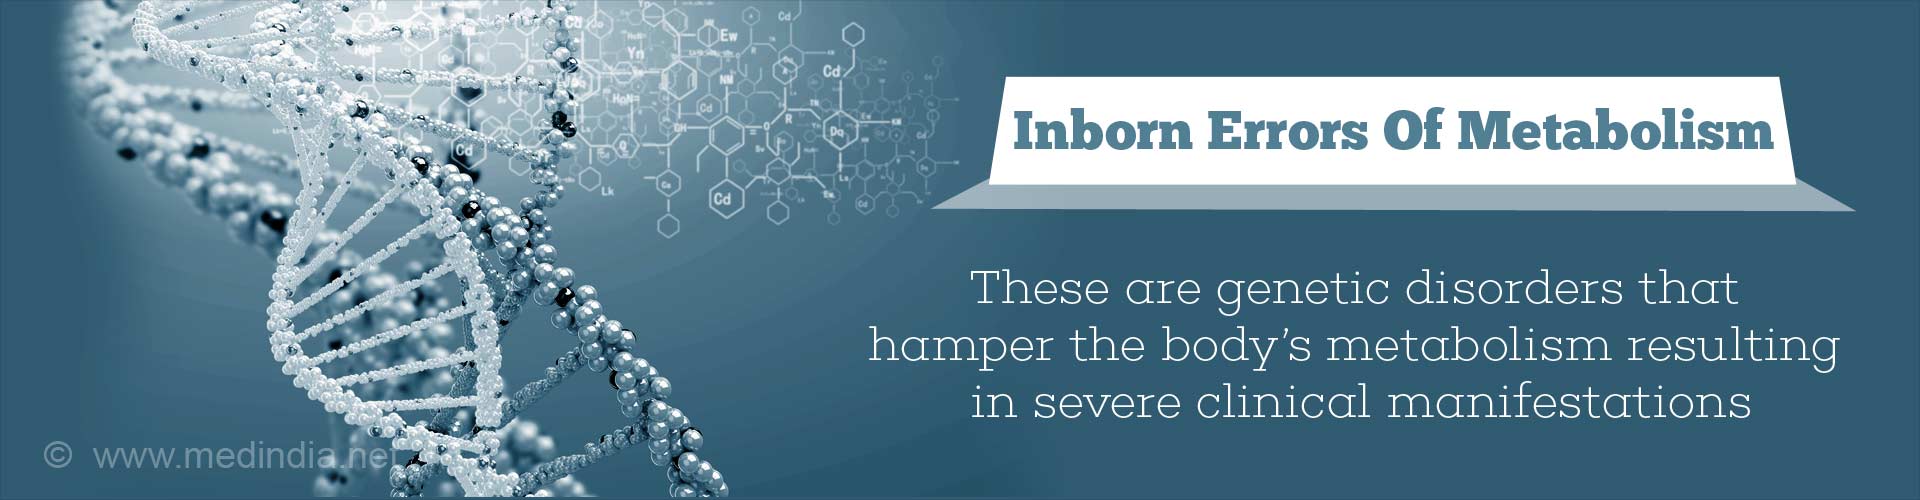 Inborn errors of metabolism - These are genetic disorders that hamper the body's metabolism resulting in severe clinical manifestations